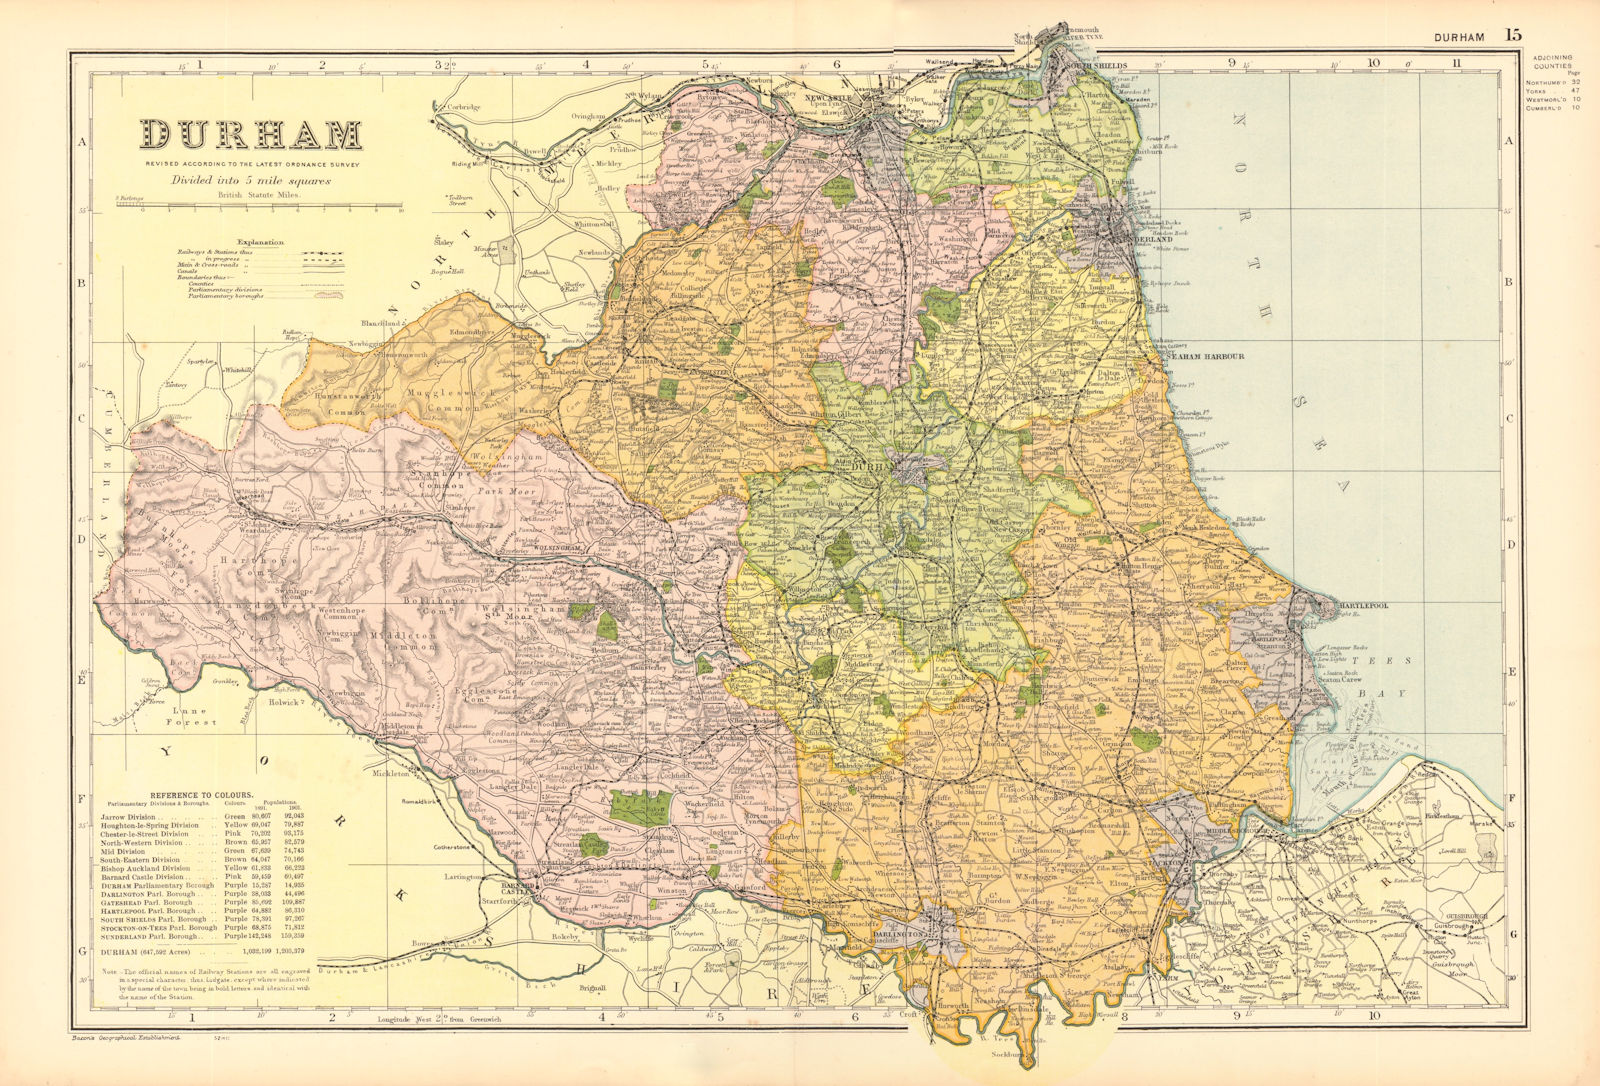 DURHAM. Showing Parliamentary divisions, boroughs & parks. BACON 1904 old map